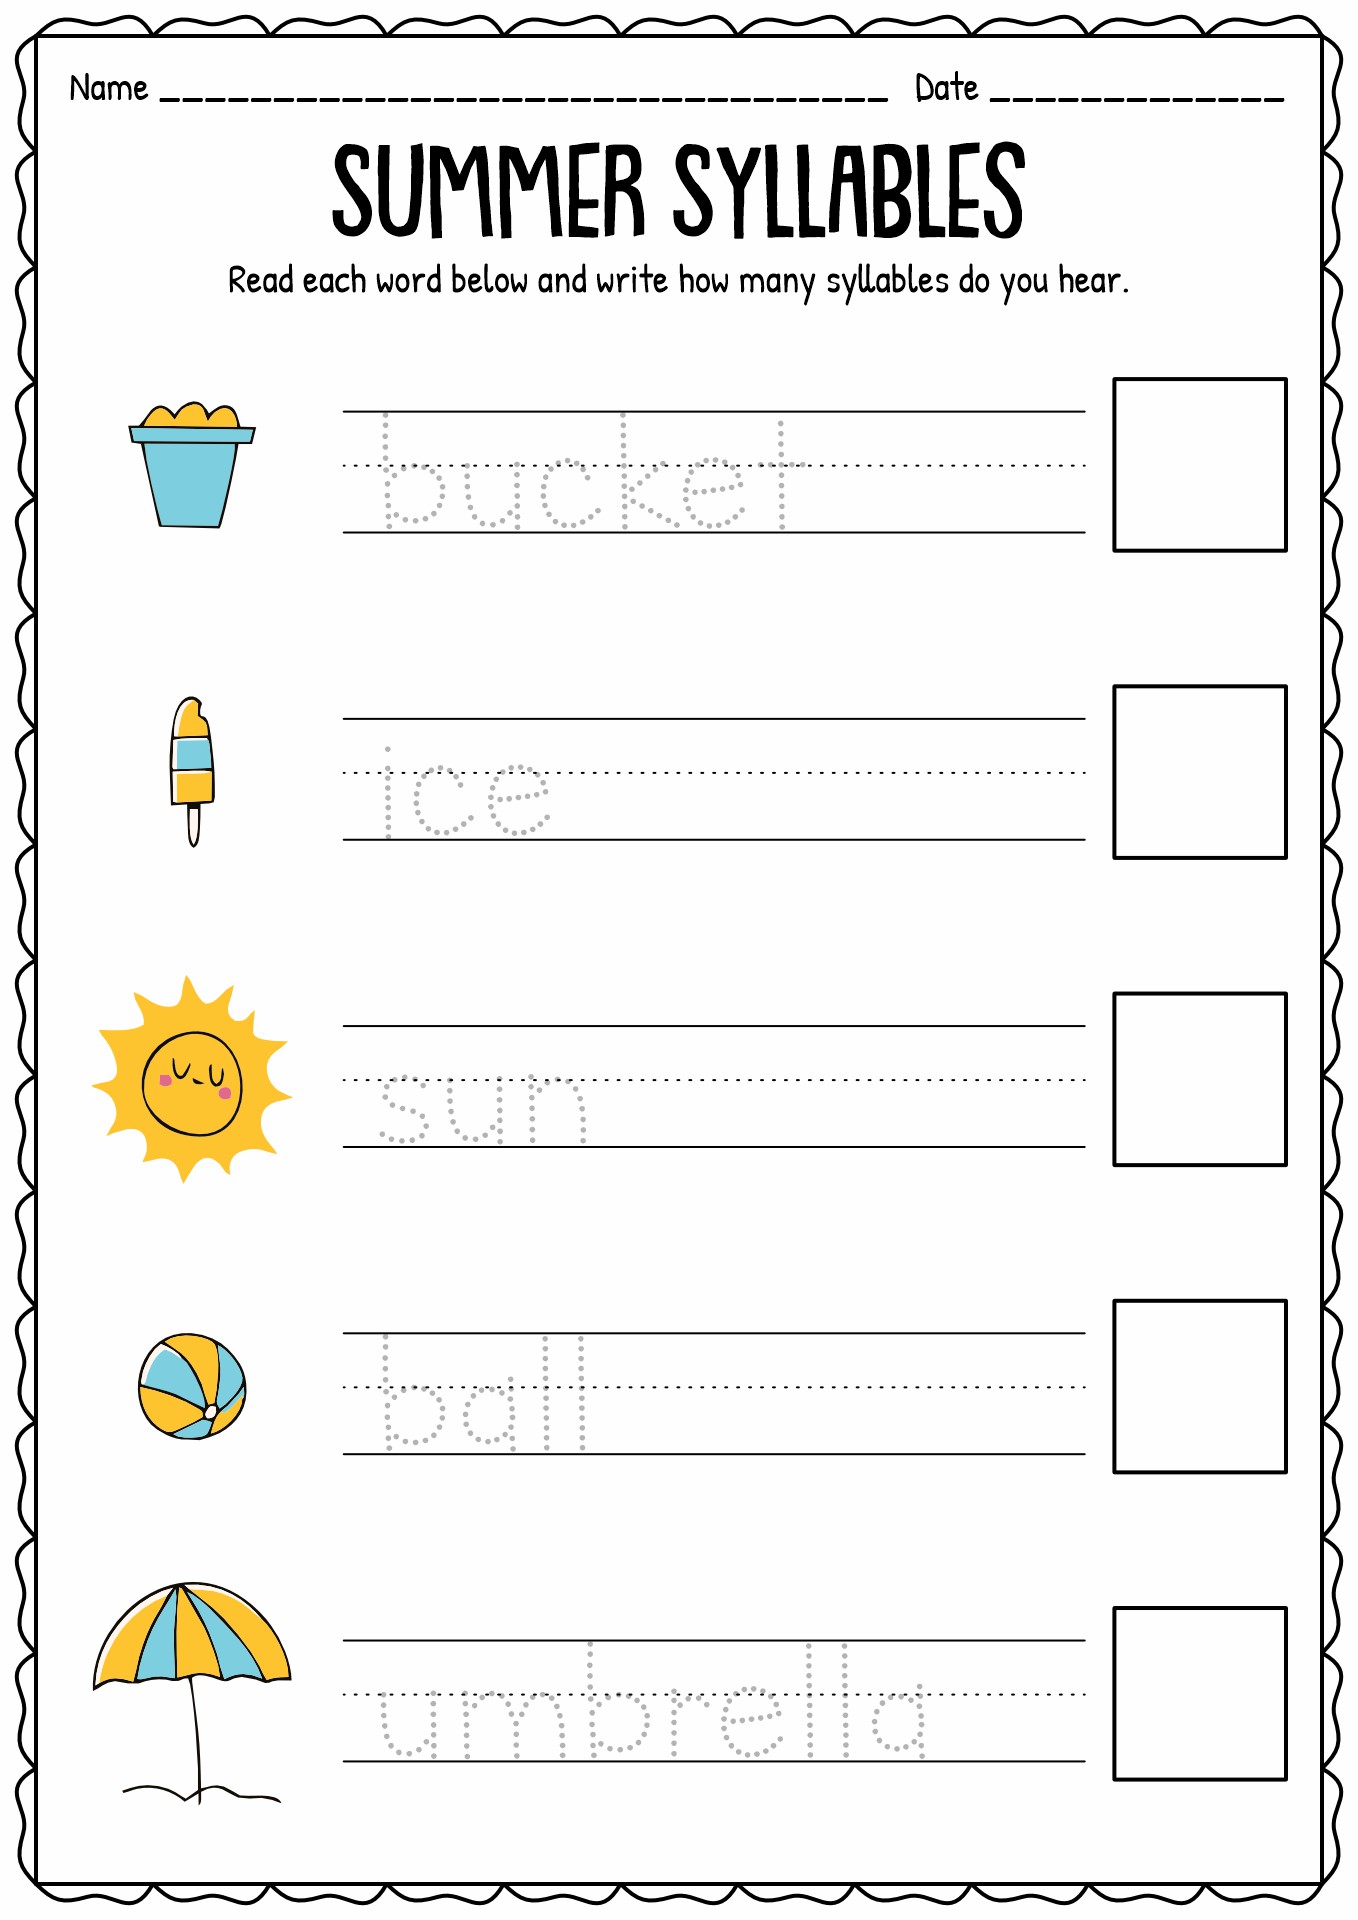 18 Best Images Of Print Syllable Worksheets Kindergarten Free Kindergarten Syllable Worksheets